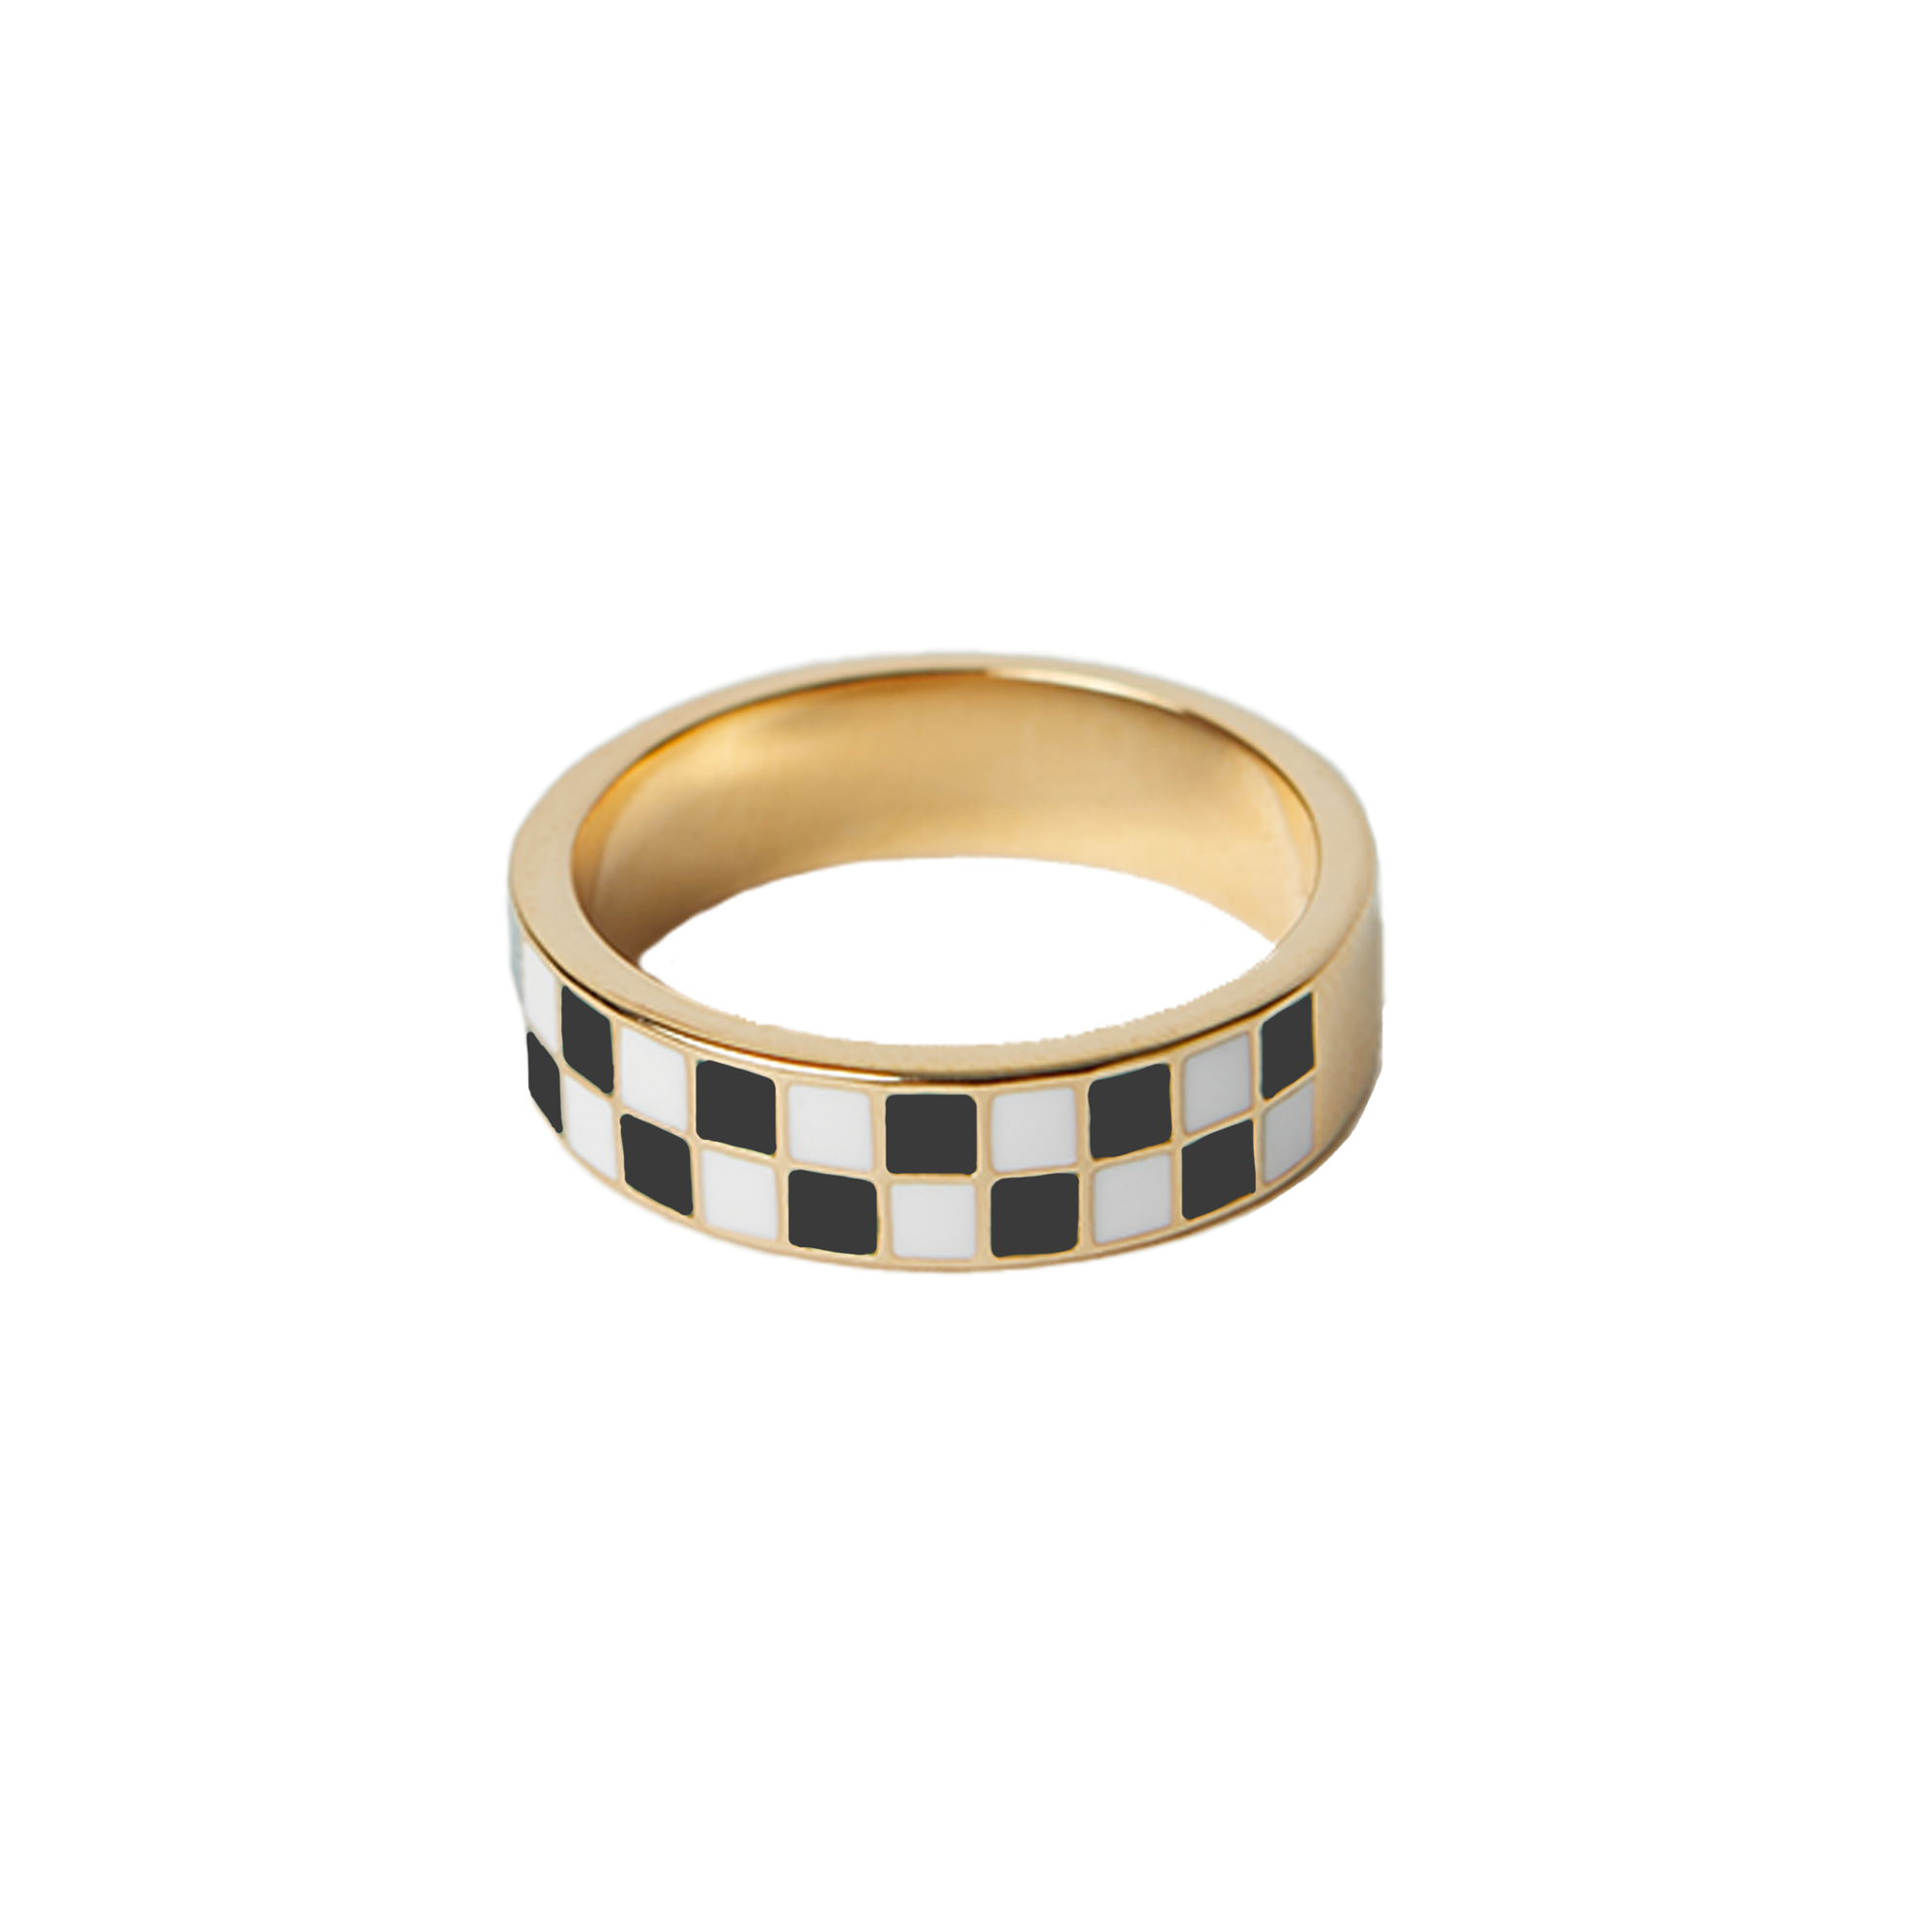 THE CHECKERED RING